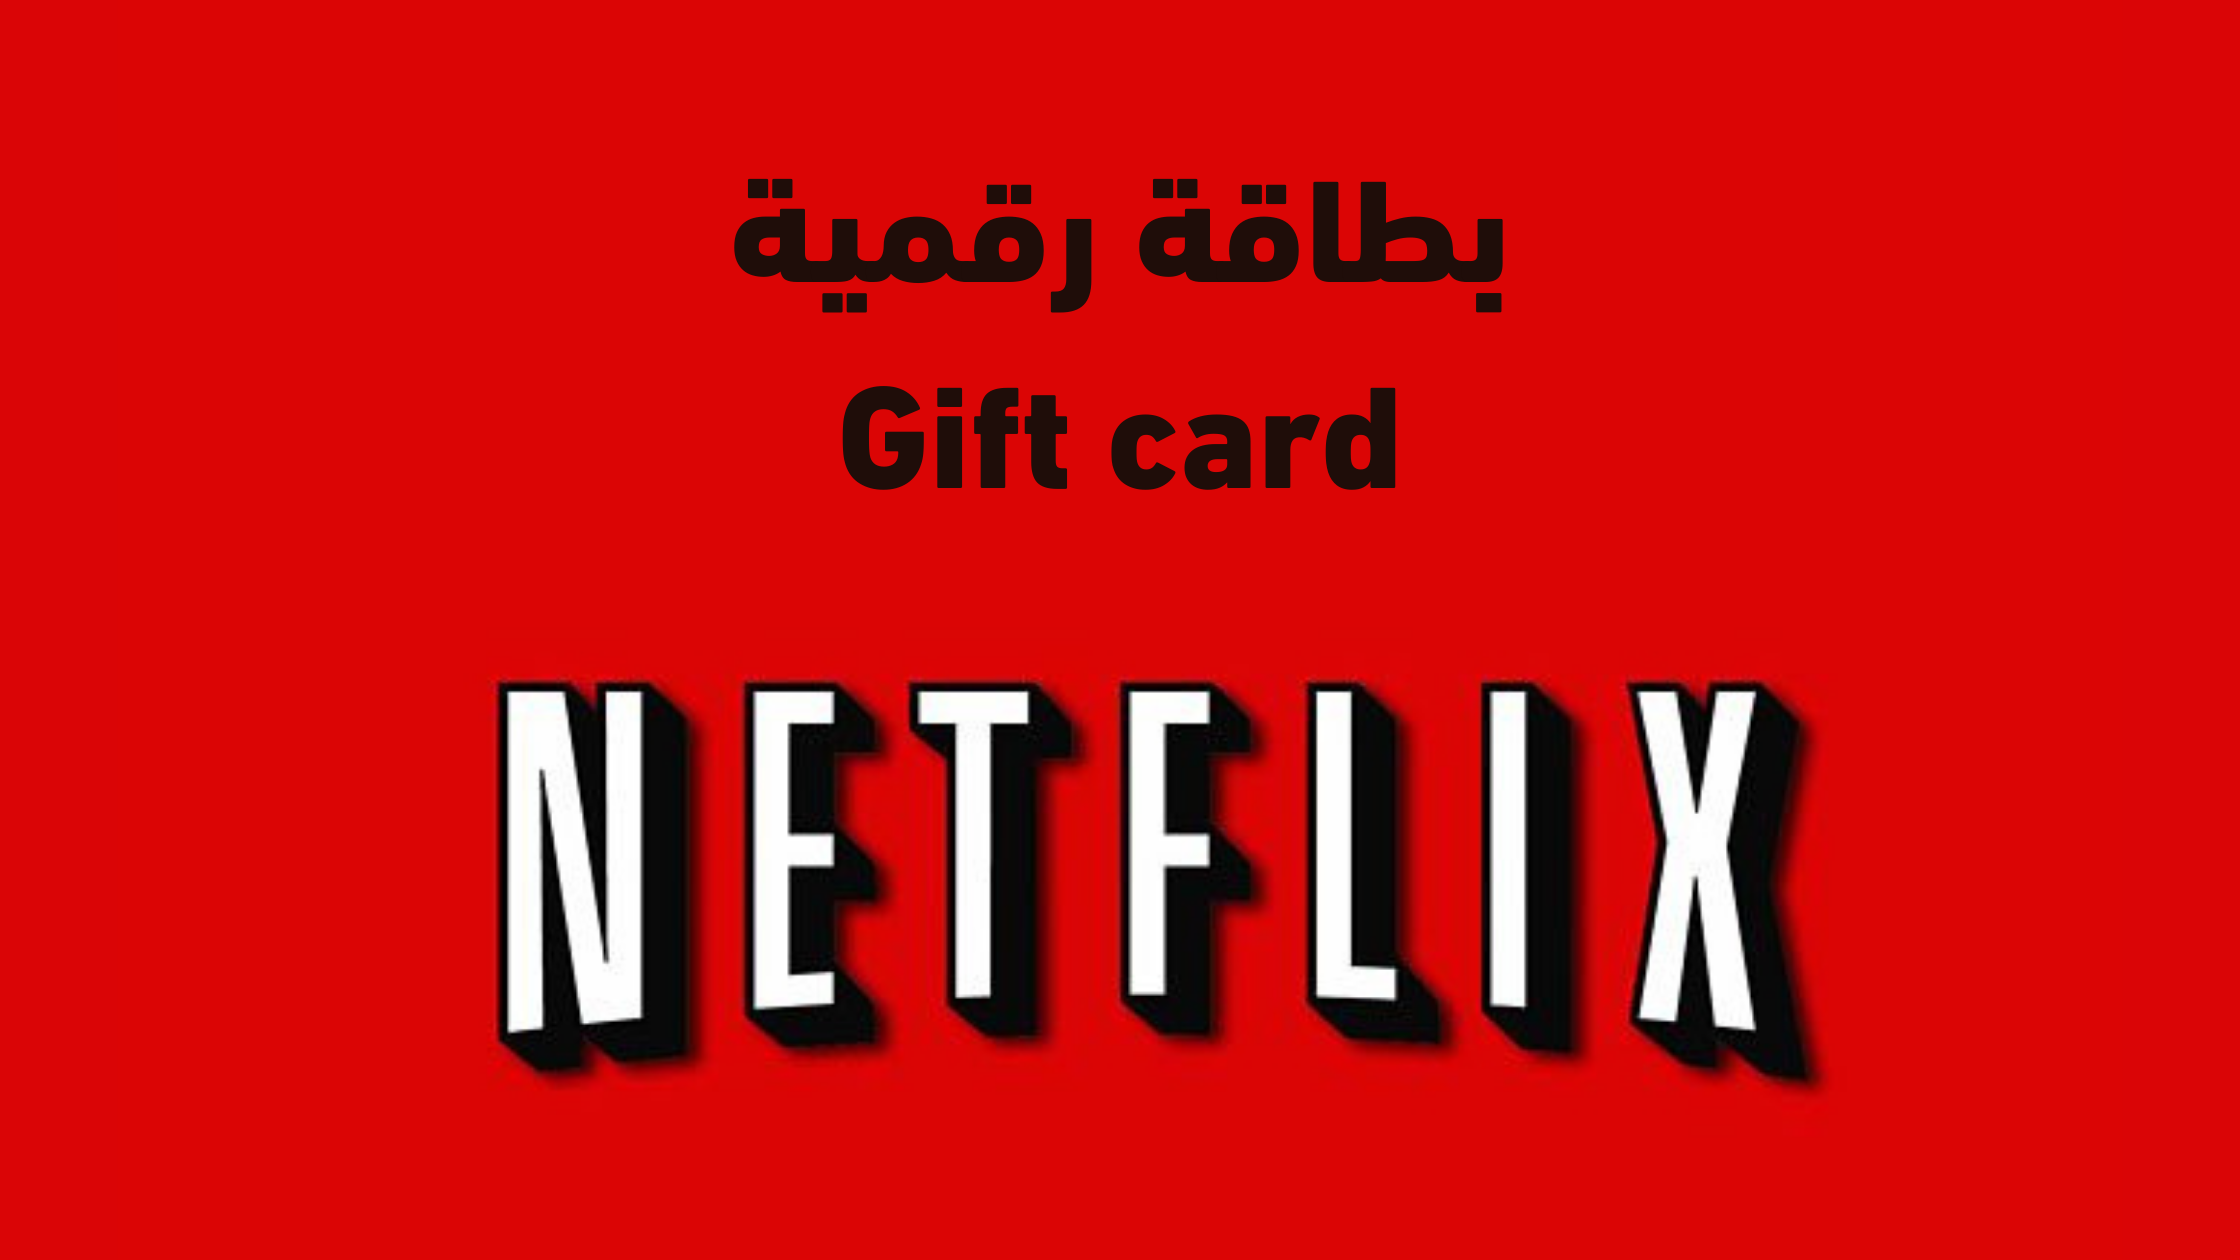 How To Use And Activate Netflix Gift Card